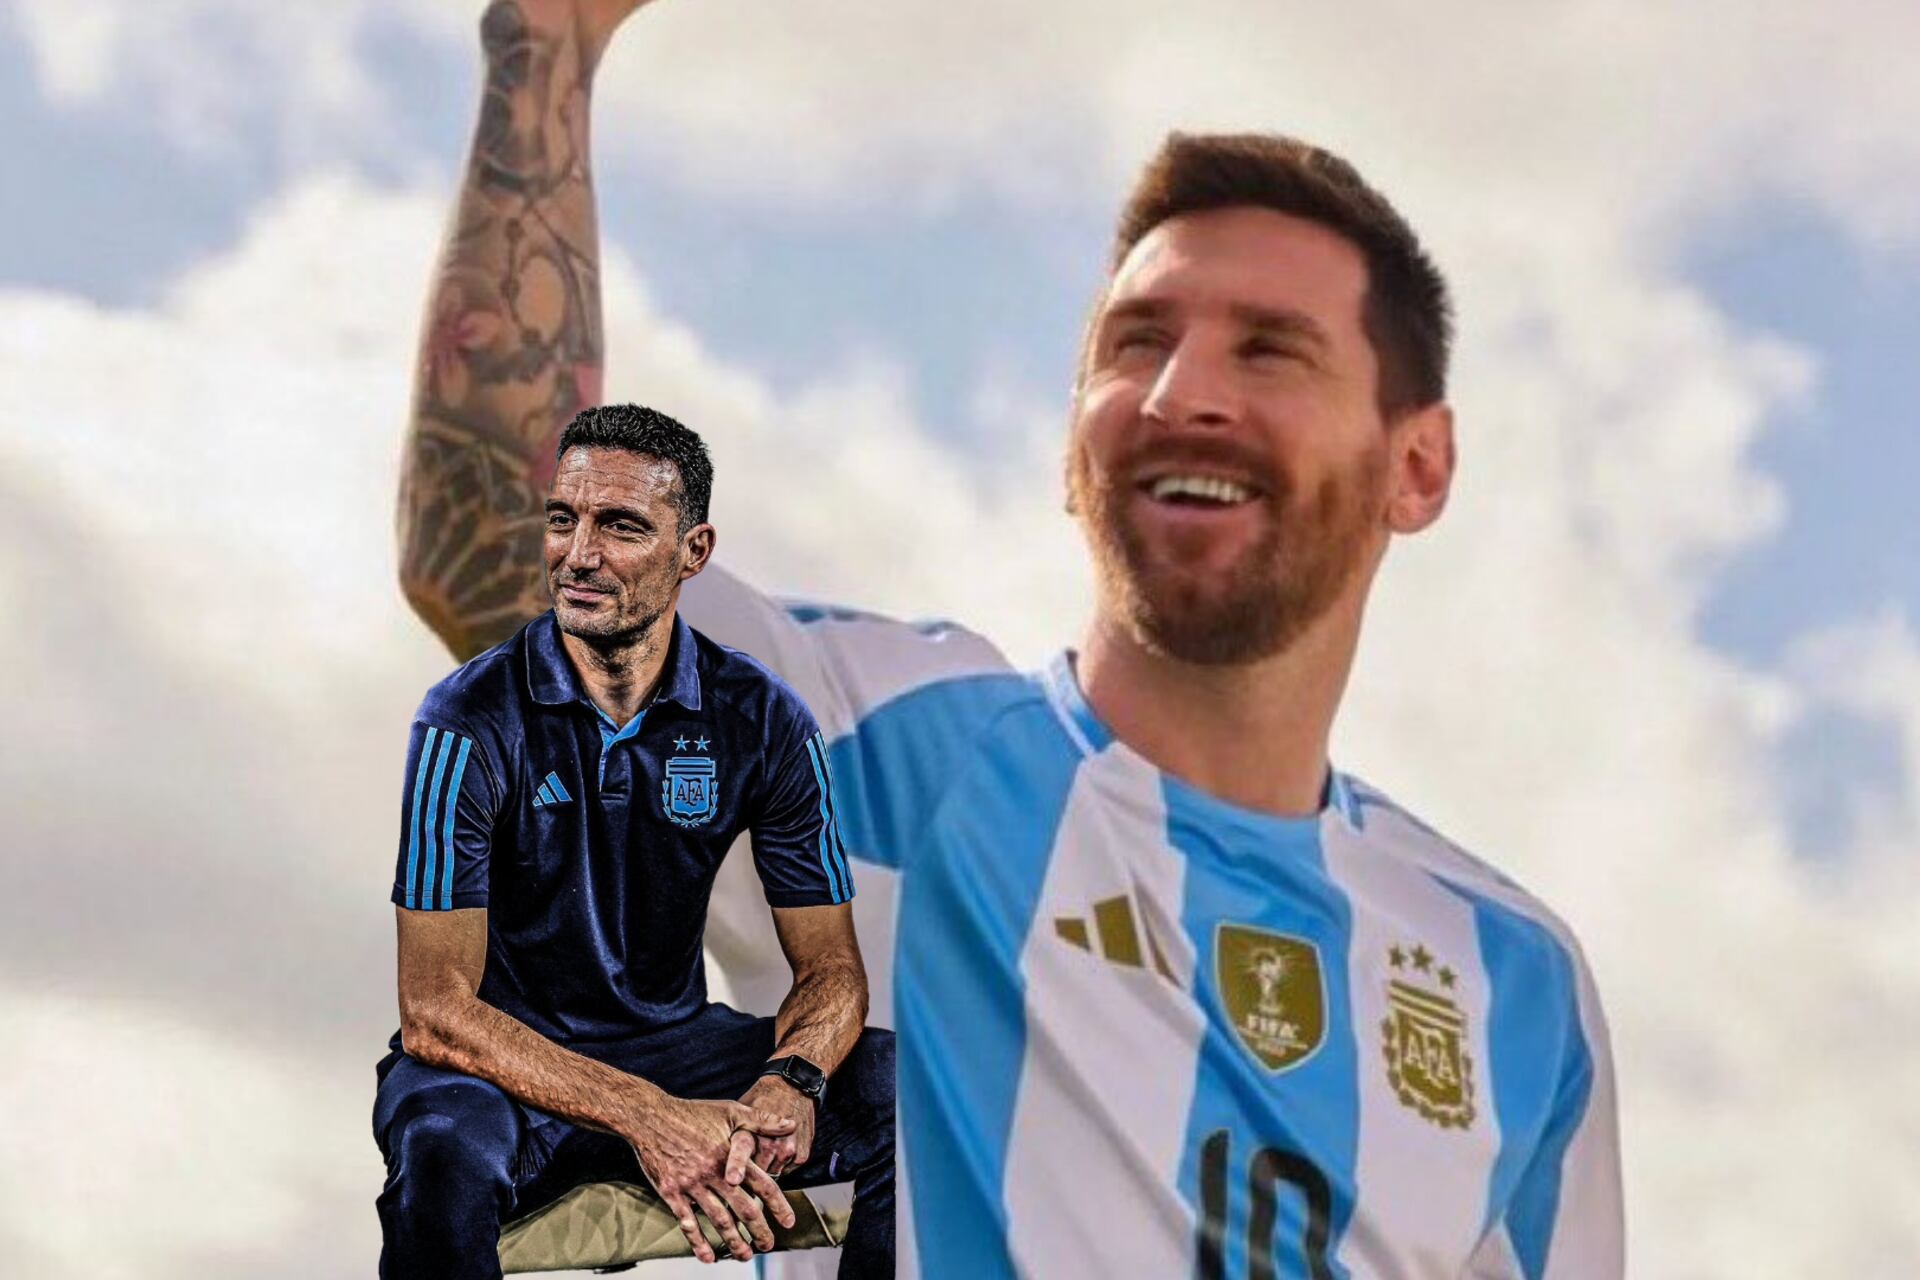 He was a world champion, called to be Messi’s heir at Argentina, but Scaloni surprisingly left him out of Copa America